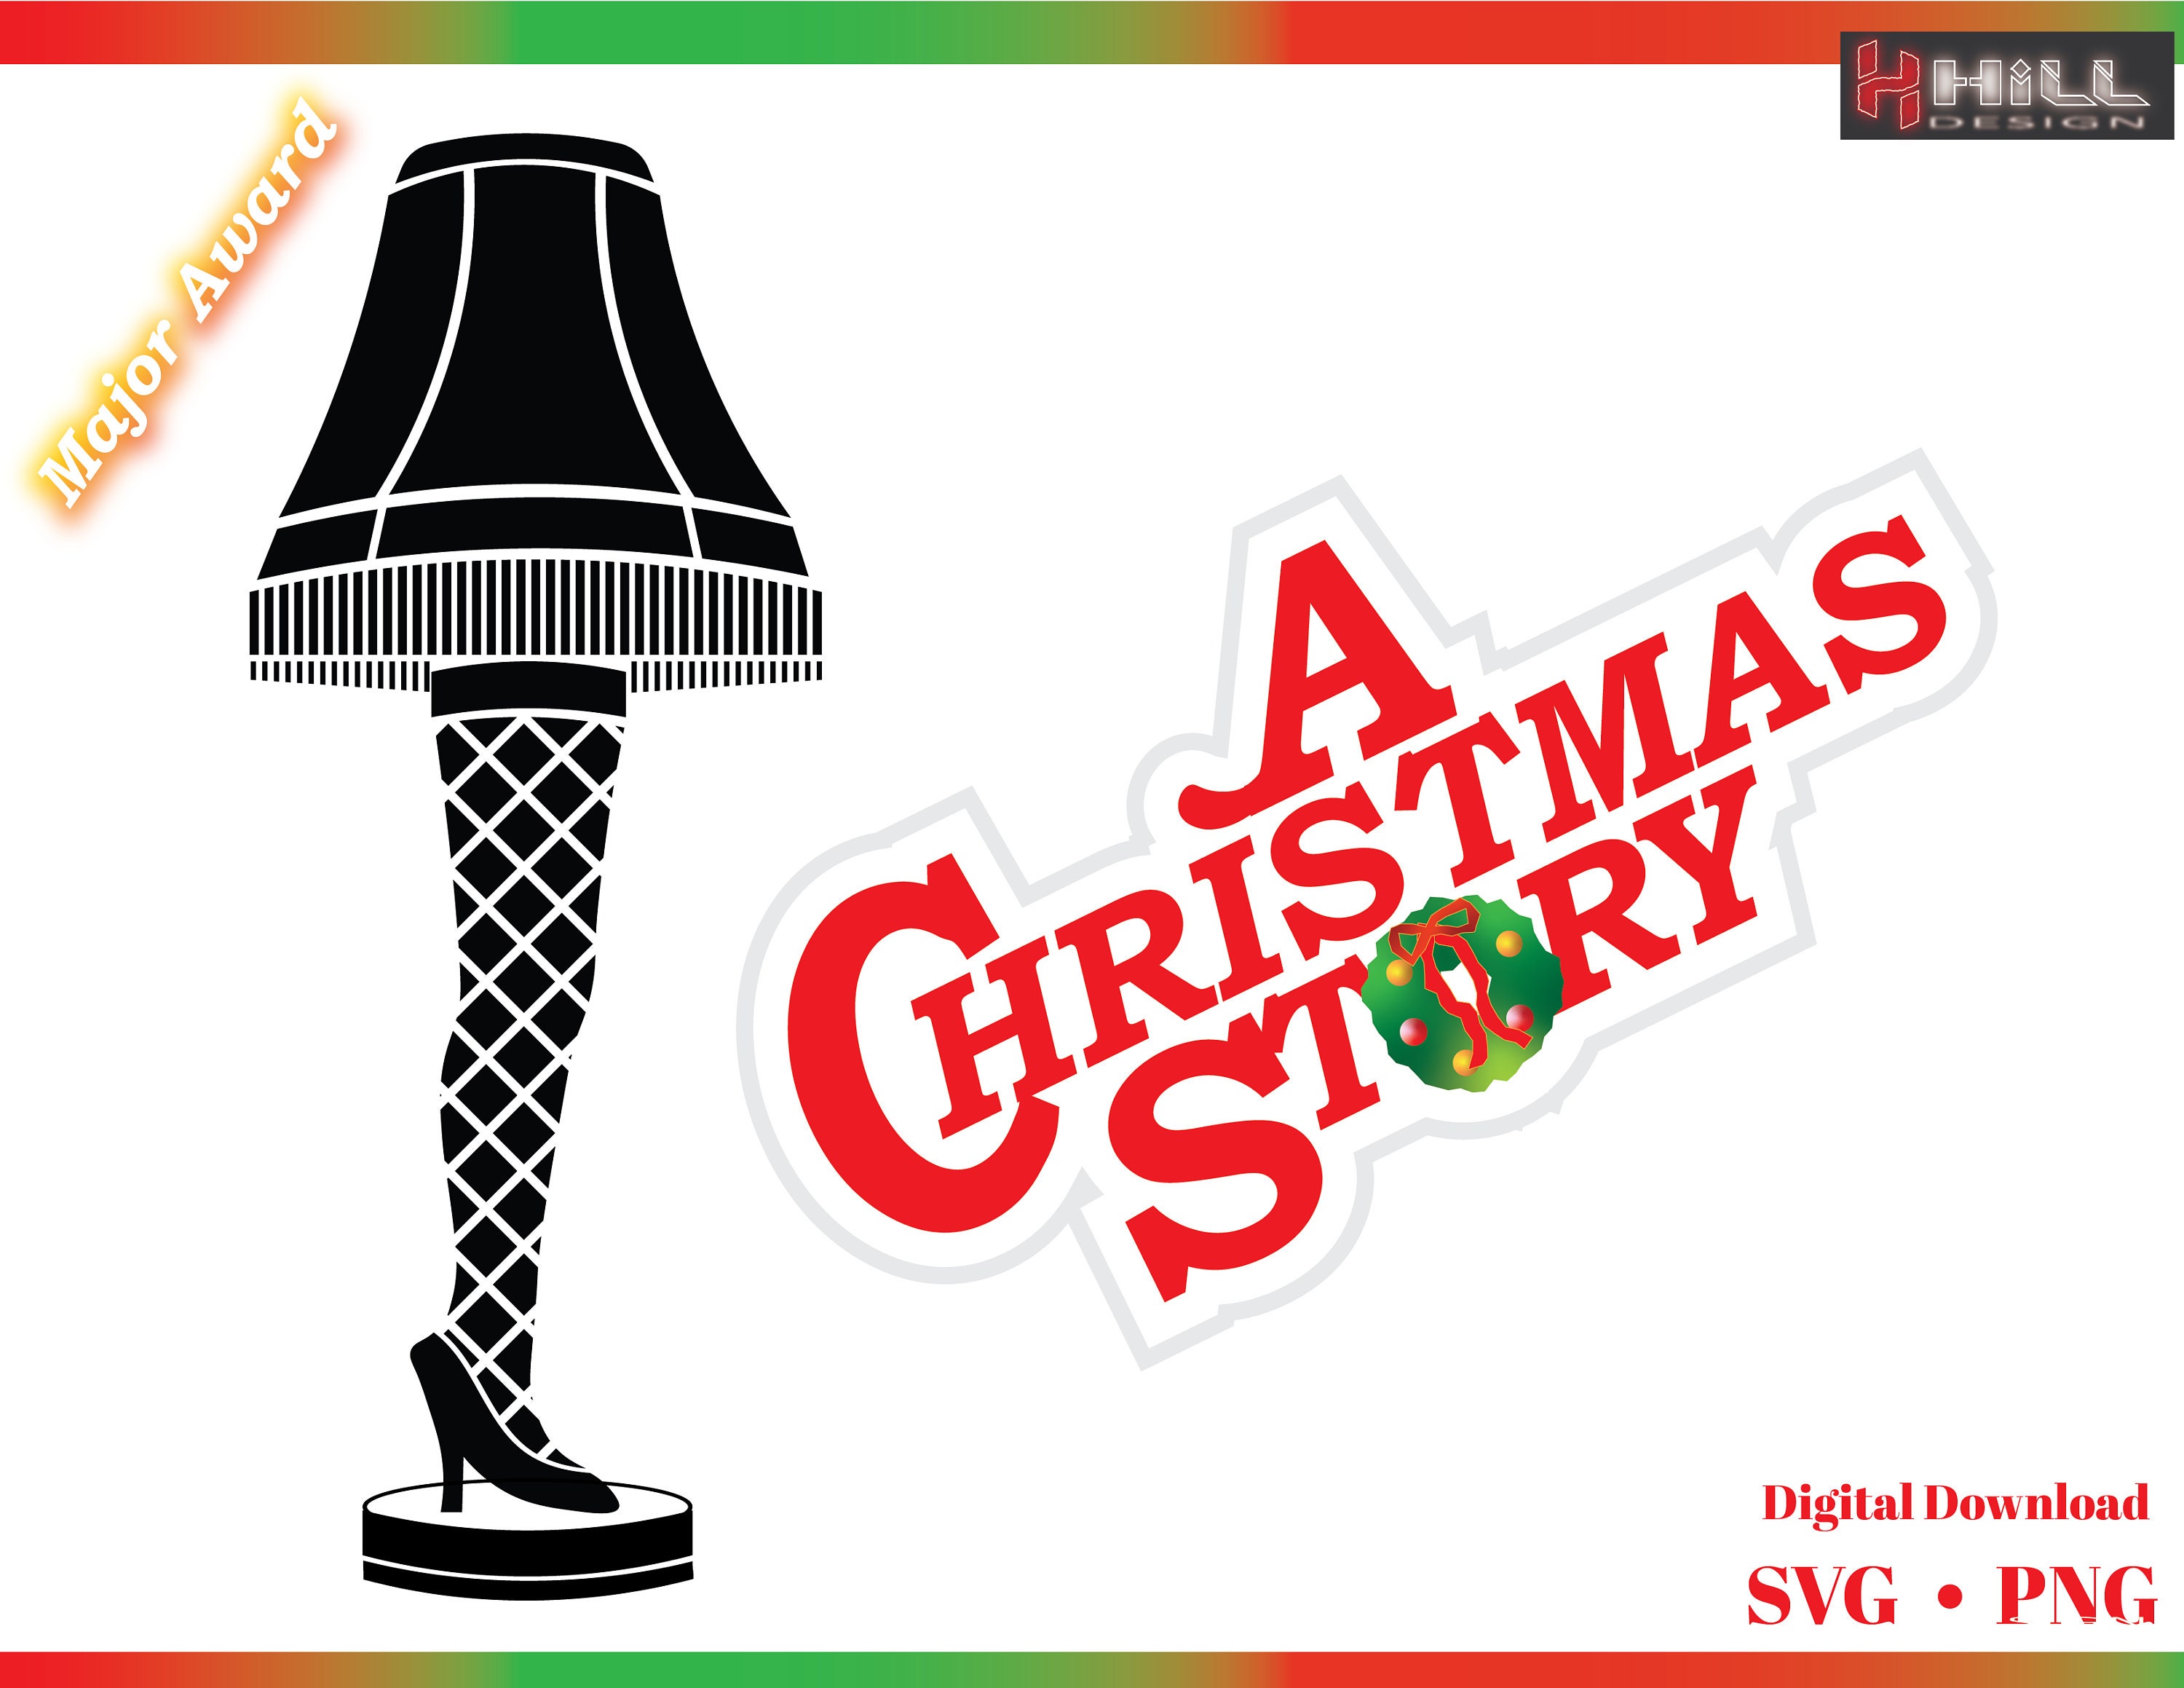 Making Xmas Card Game from The Nightmare before Christmas 56974 – Red Rider  Leg Lamps